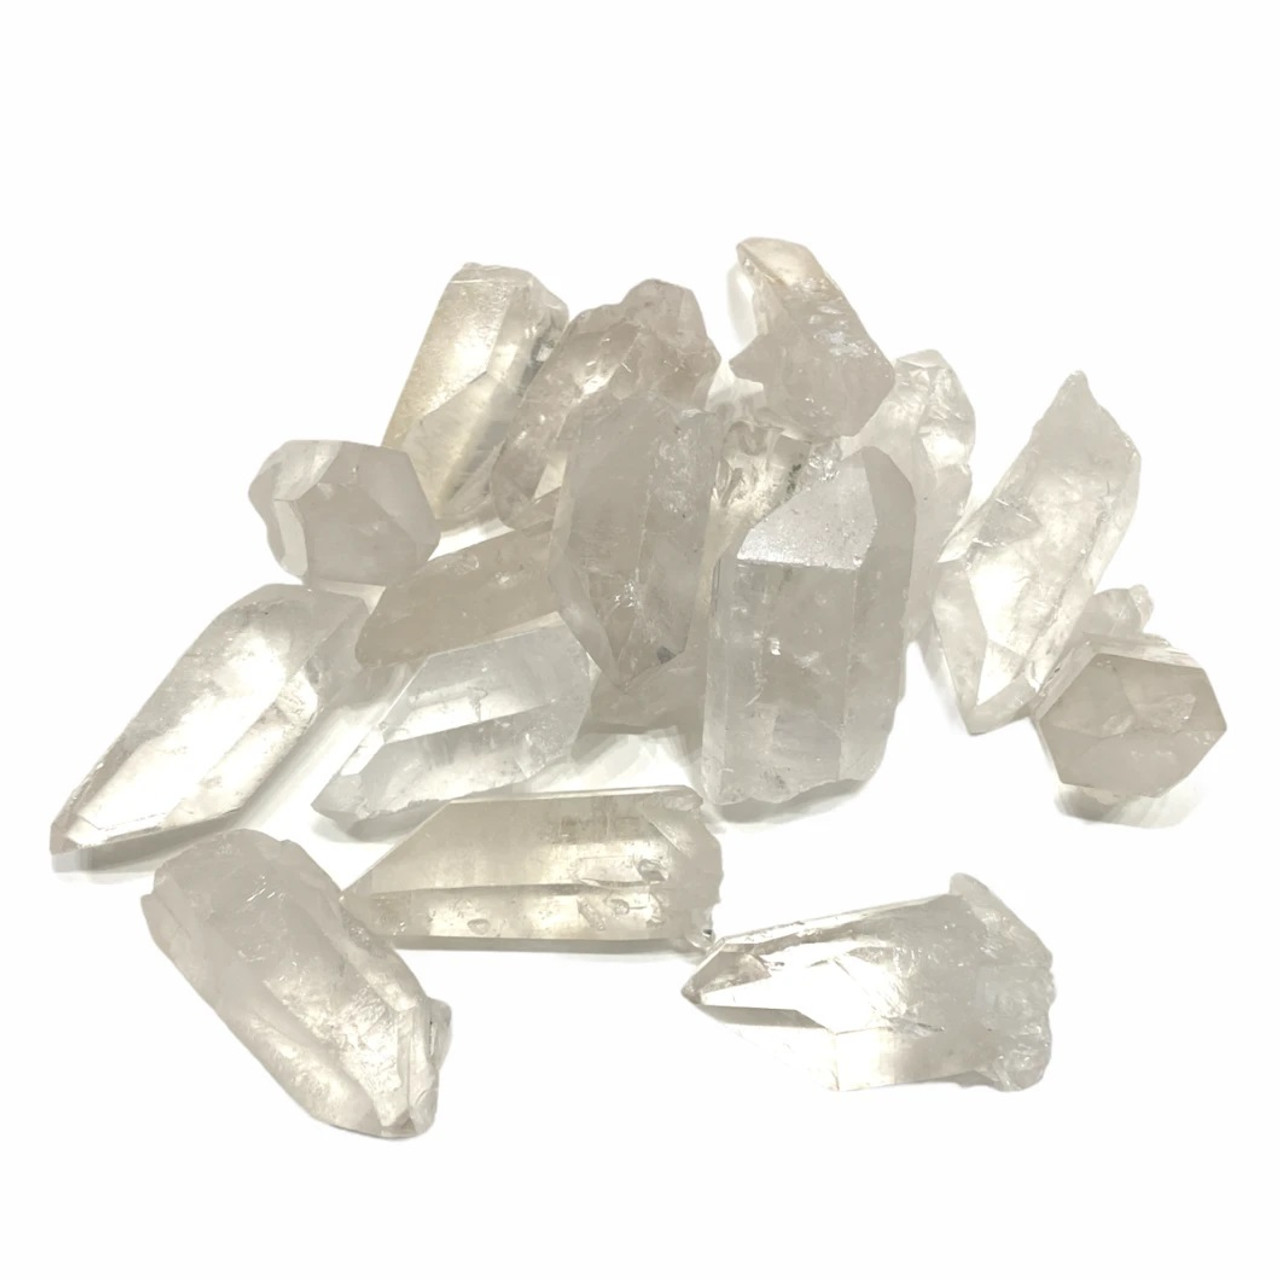 Punta Cuarzo Cristal Piedra Clear Quartz Crystal Points Raw Natural Stones,  200 g / 7 oz - 4 cm / 1.6 approx ea (Variety of Shapes & Sizes)